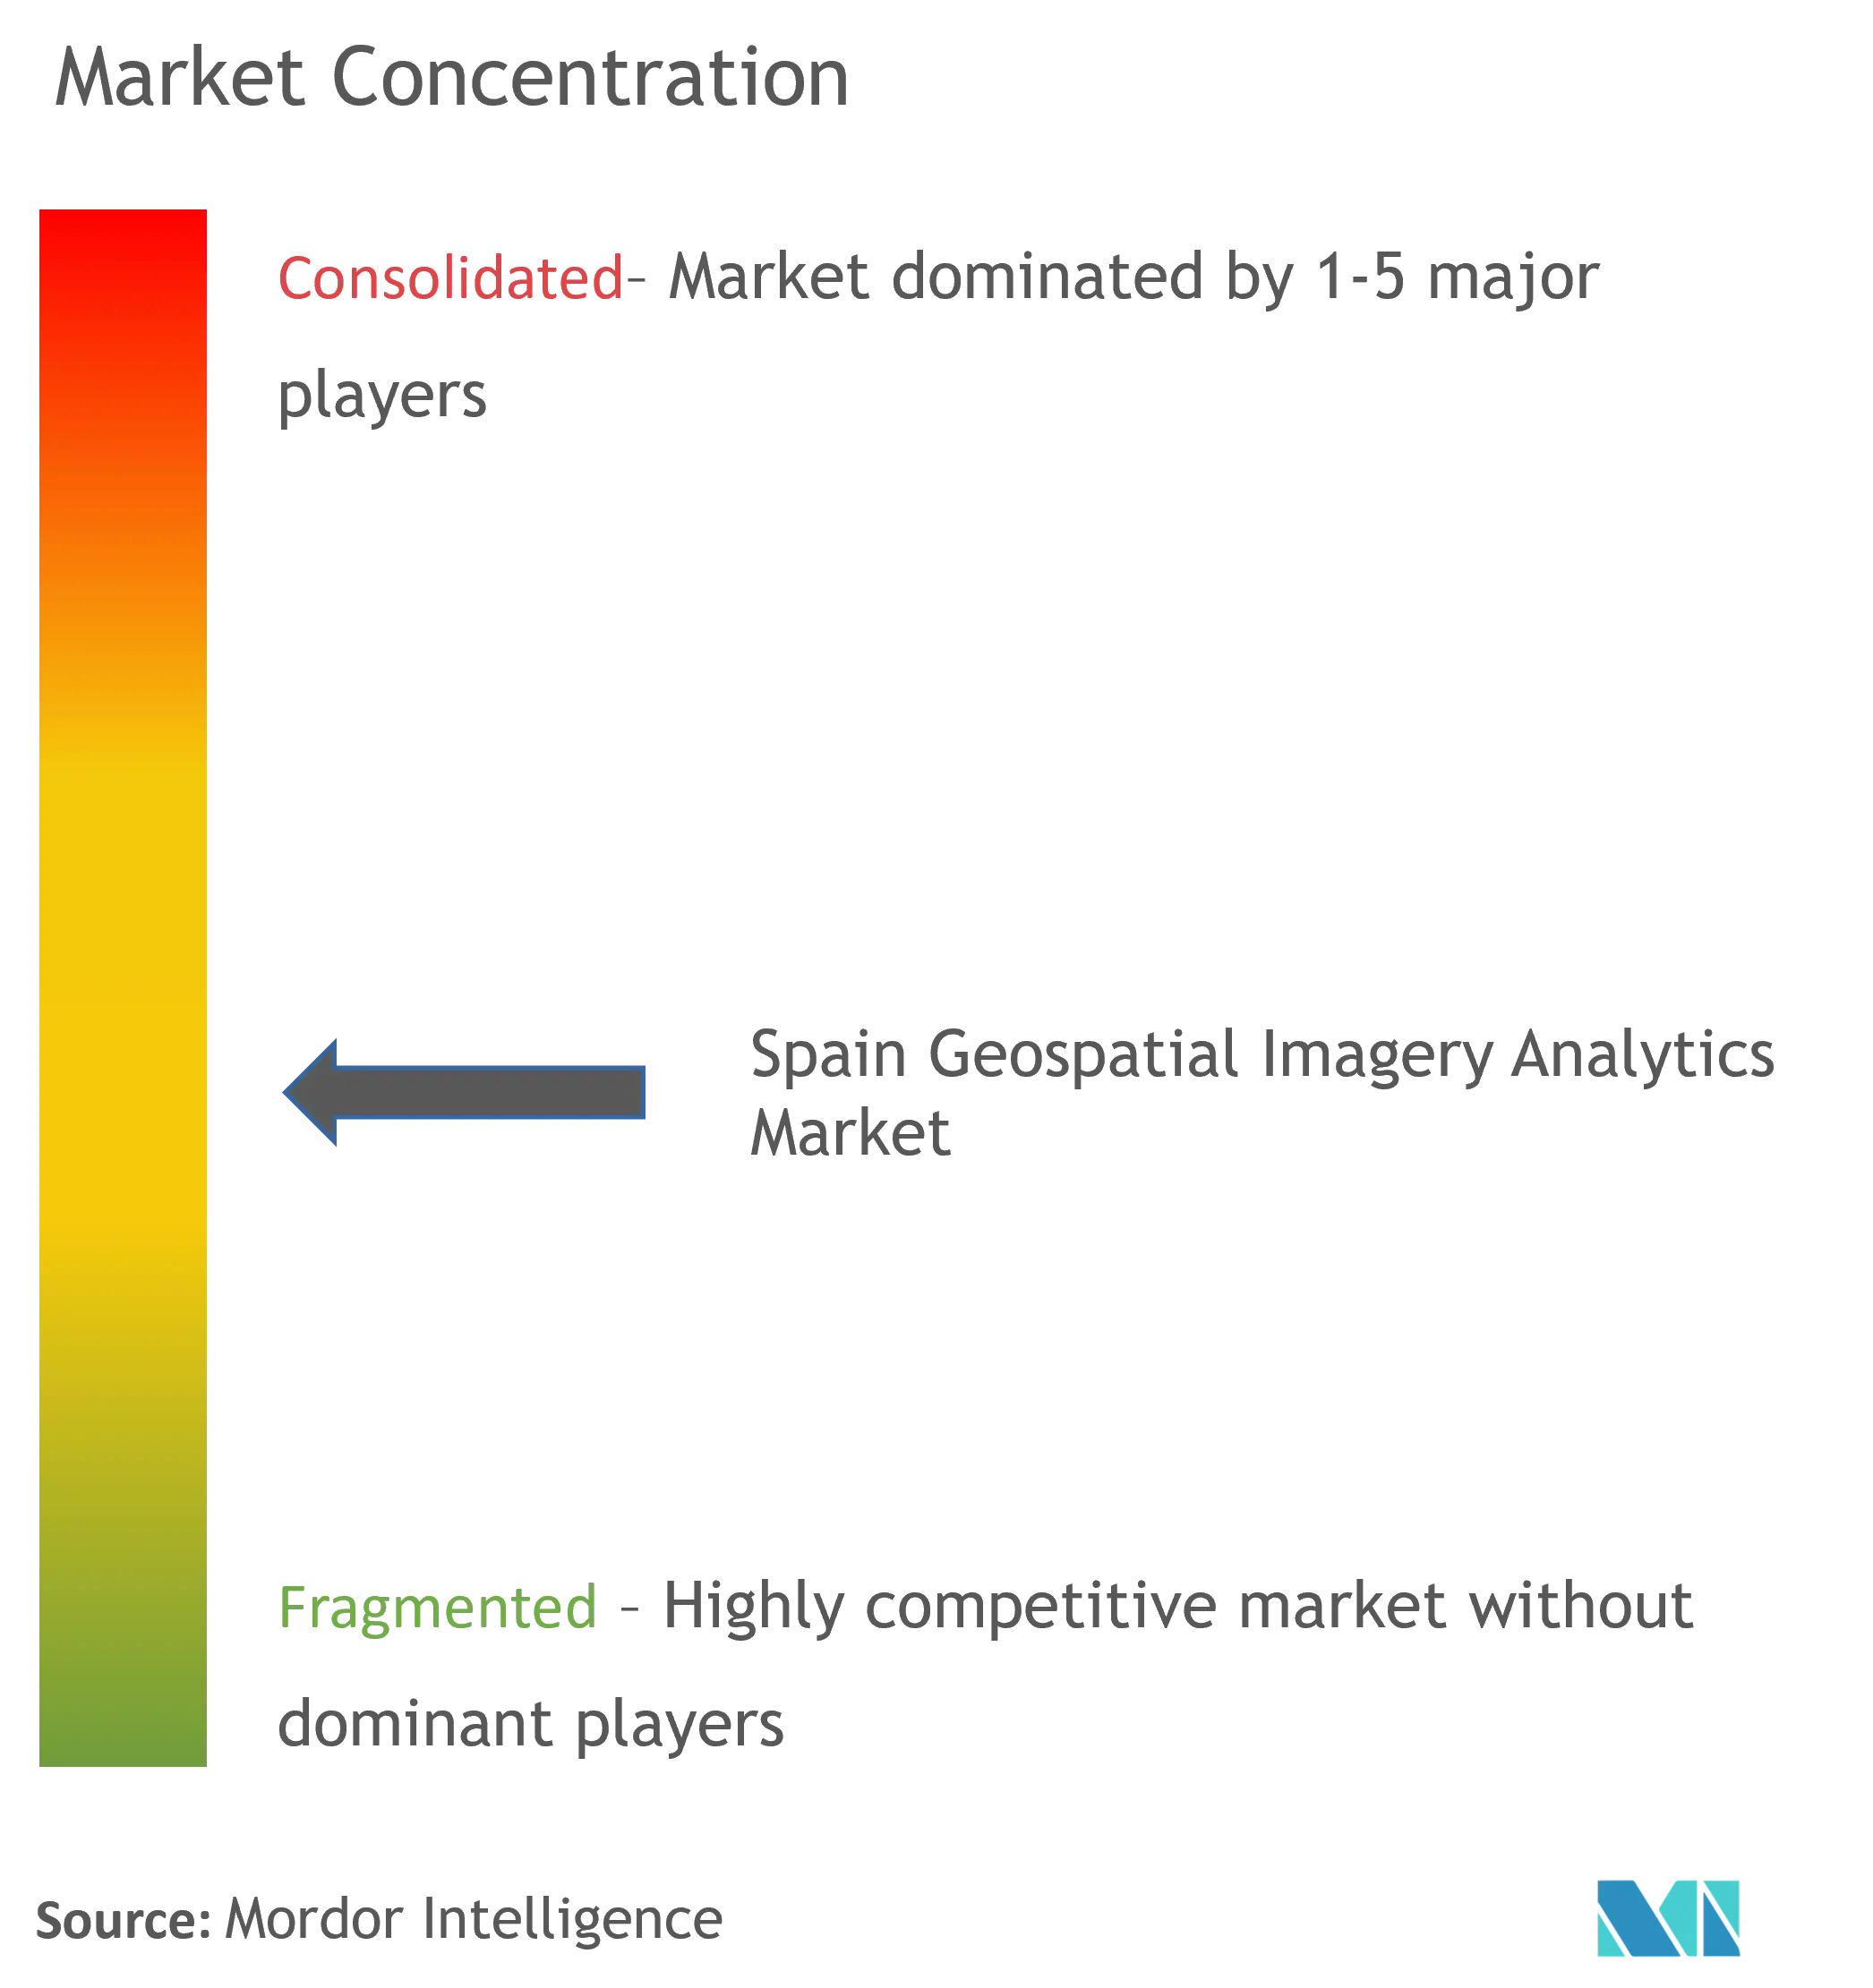 Spain Geospatial Imagery Analytics Market Concentration